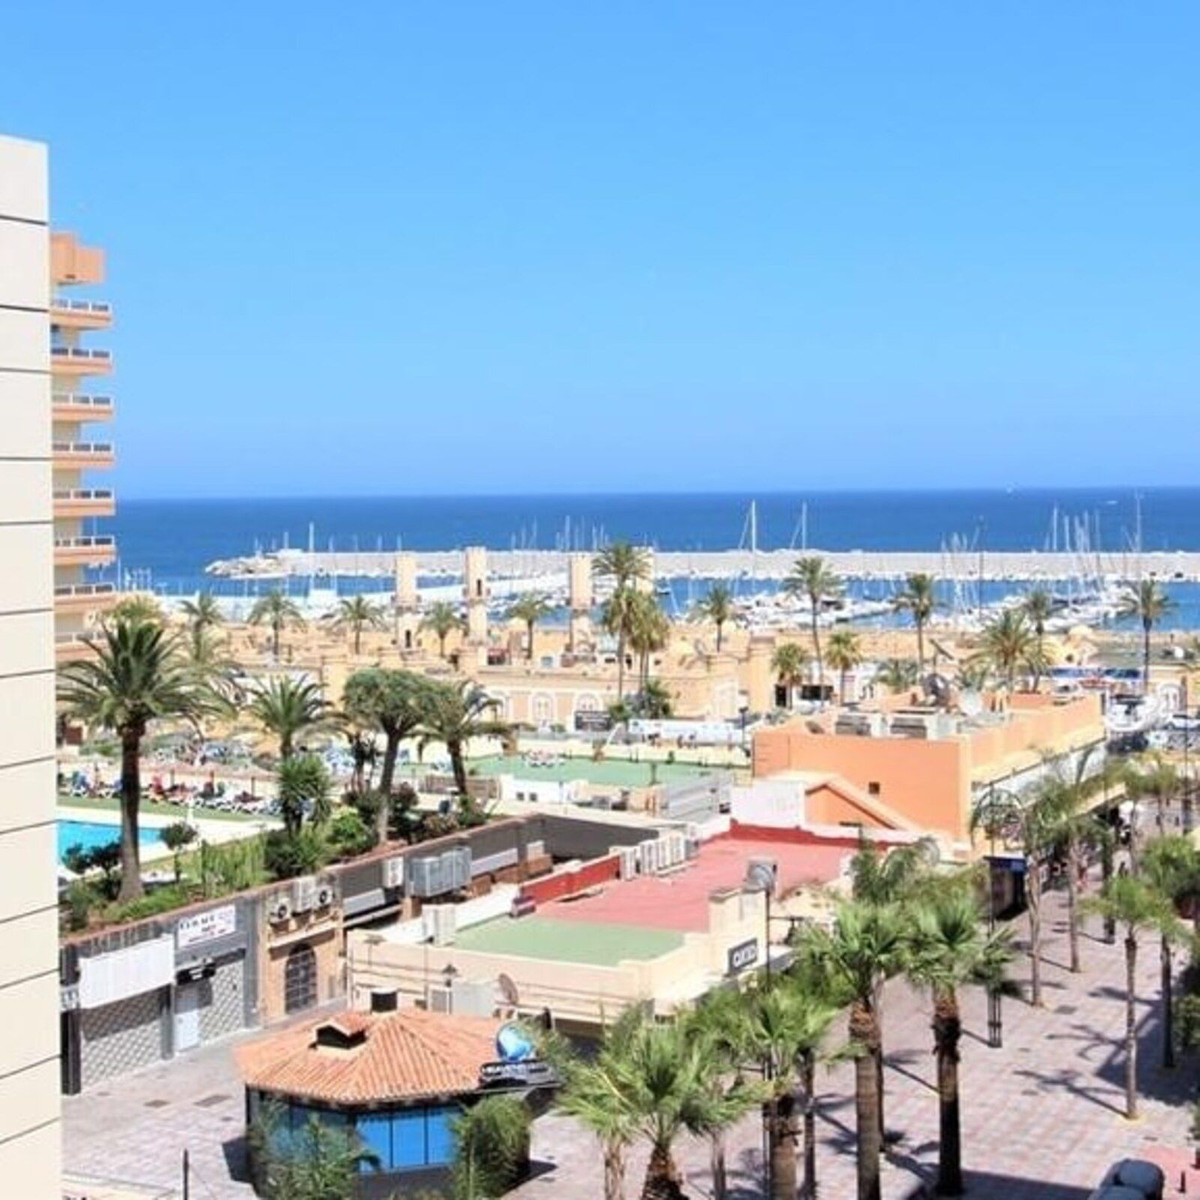 Studio for sale on the beachfront on the Fuengirola promenade. A very profitable investment for holi, Spain